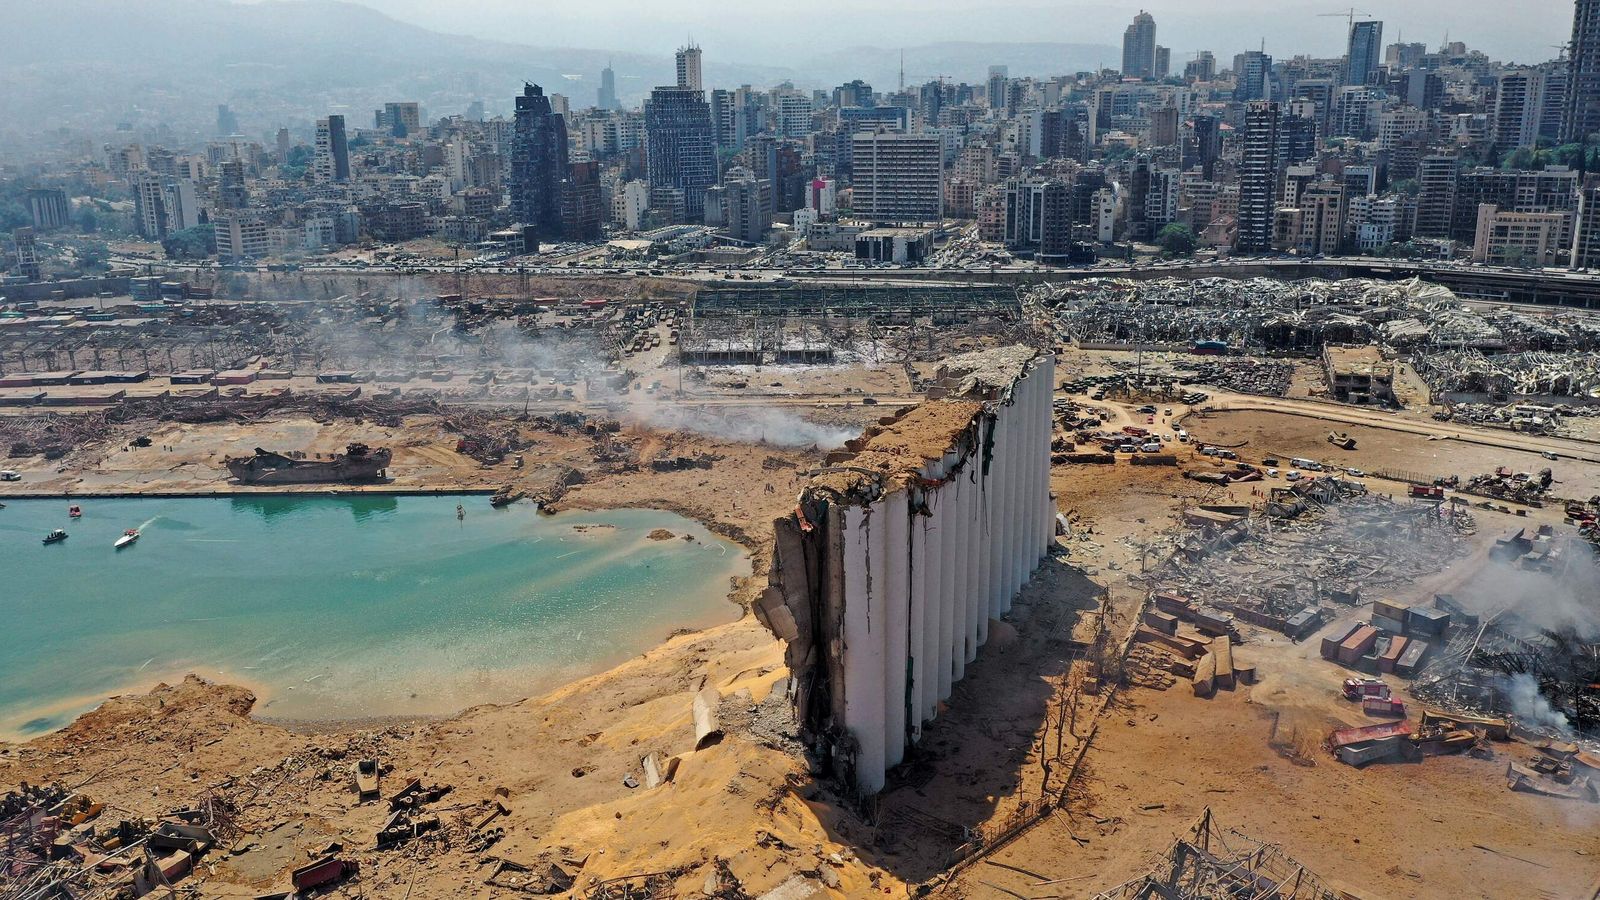 TOPSHOT - An aerial view shows the massive damage at Beirut port's grain silos and the area around it on August 5, 2020, one day after a massive explosion hit the heart of the Lebanese capital. - Rescuers searched for survivors in Beirut in the morning after a cataclysmic explosion at the port sowed devastation across entire neighbourhoods, killing more than 100 people, wounding thousands and plunging Lebanon deeper into crisis. (Photo by - / AFP) (Photo by -/AFP via Getty Images)